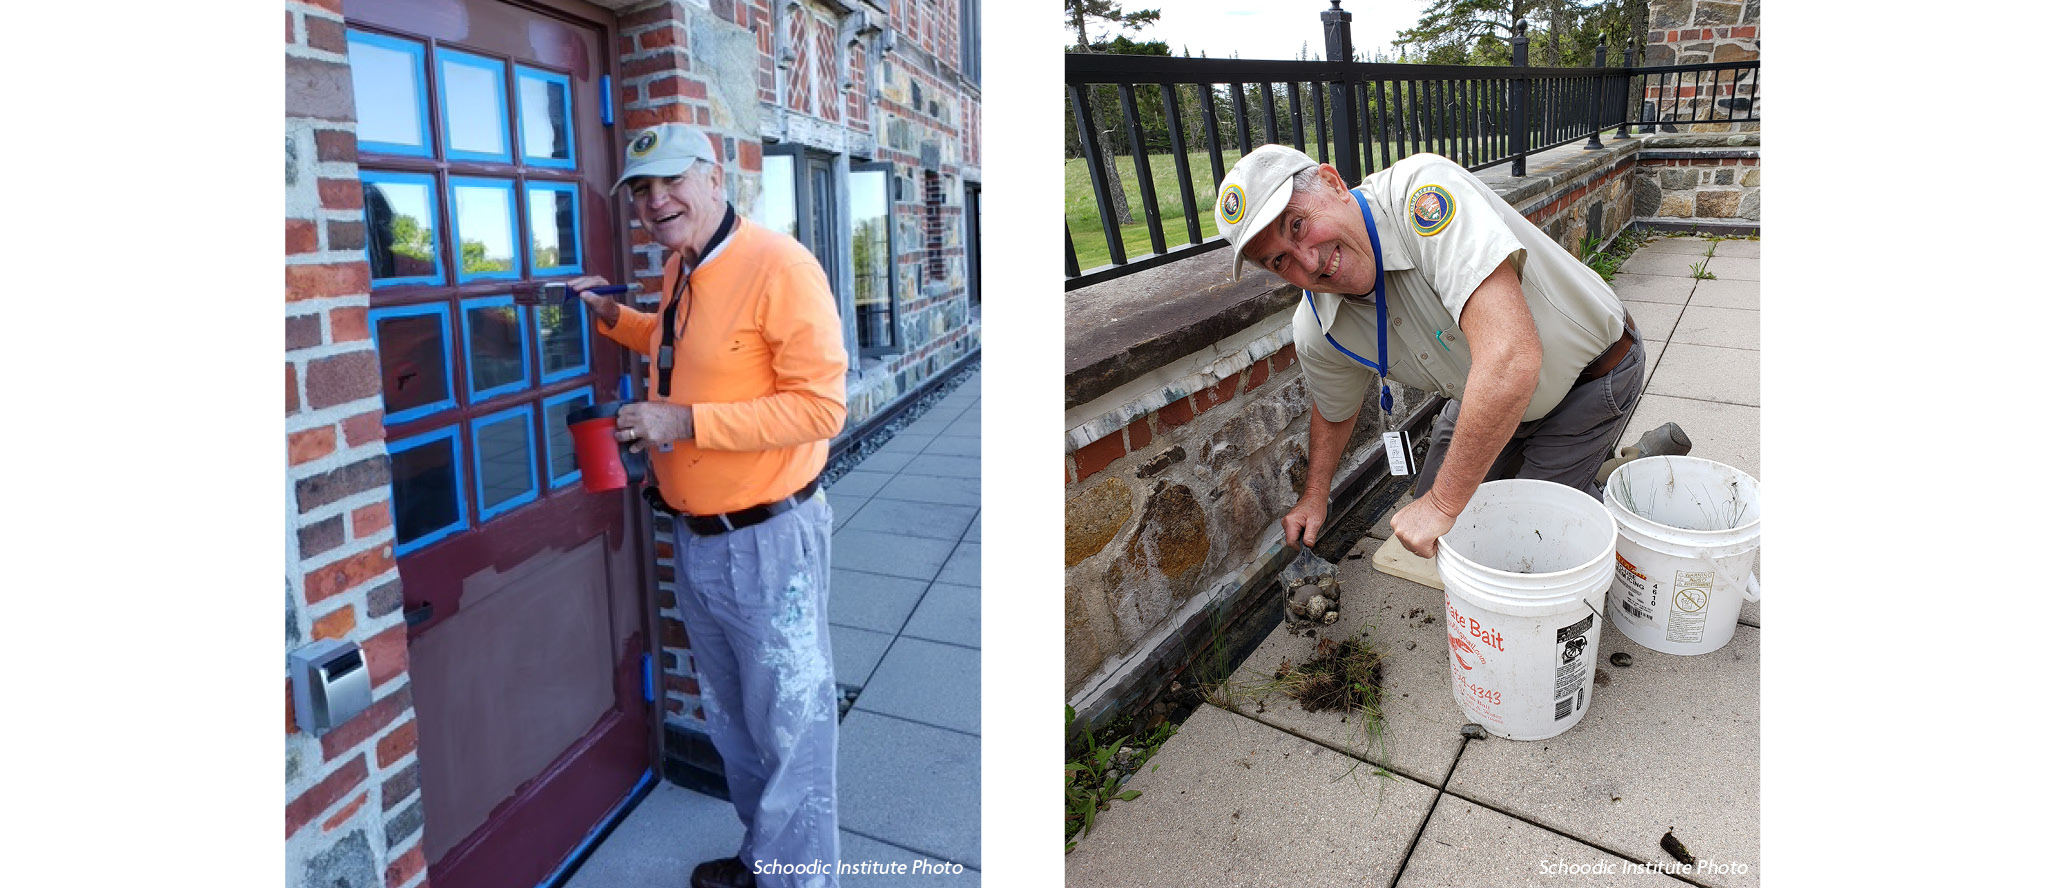 At the left hand side, volunteer host Tommy Jarrett applies a fresh coat of paint to the exterior of a door at Rockefeller Hall on the Schoodic Institute campus. At the right hand side, volunteer host John Foldeschi does some light maintenance to the outdoor patio at Schoodic Institute.